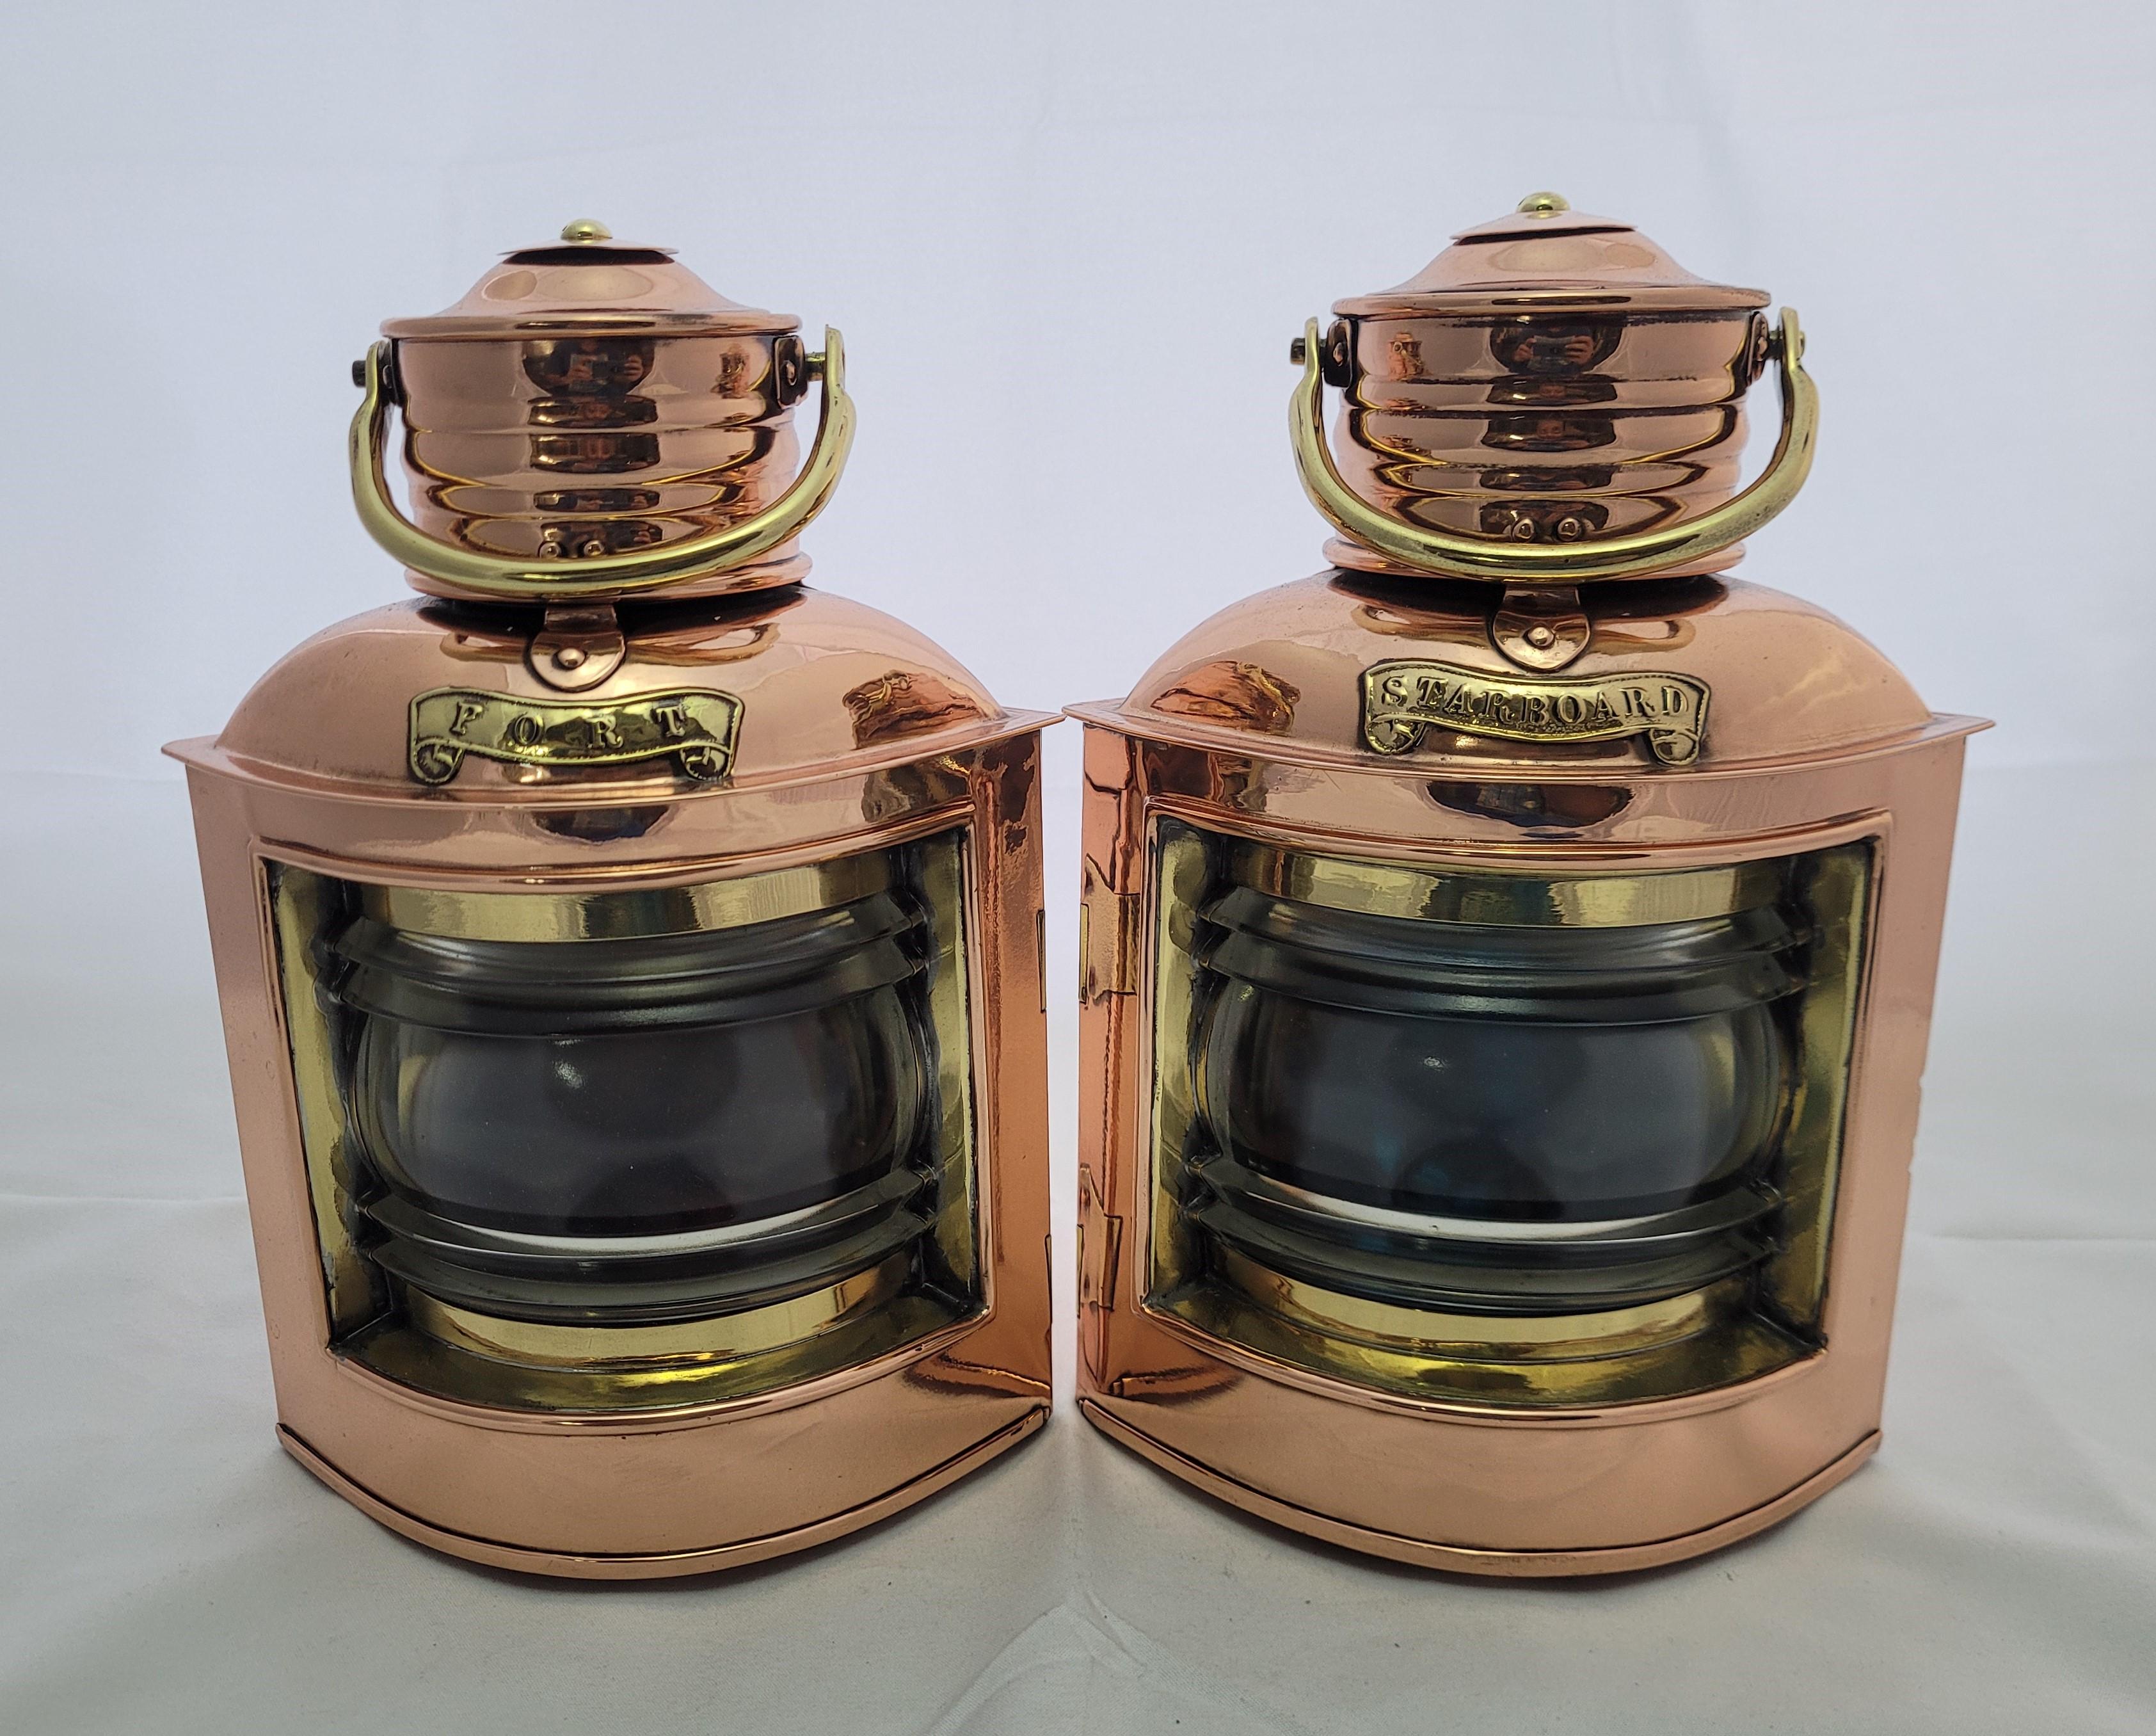 Copper and brass port and starboard boat lanterns. English made. Copper cases with brass trim including lens bezels, handles, port and starboard badges, brackets, hinges, door latch, etc.. Clear Fresnel glass lenses with red and blue filters. Choice